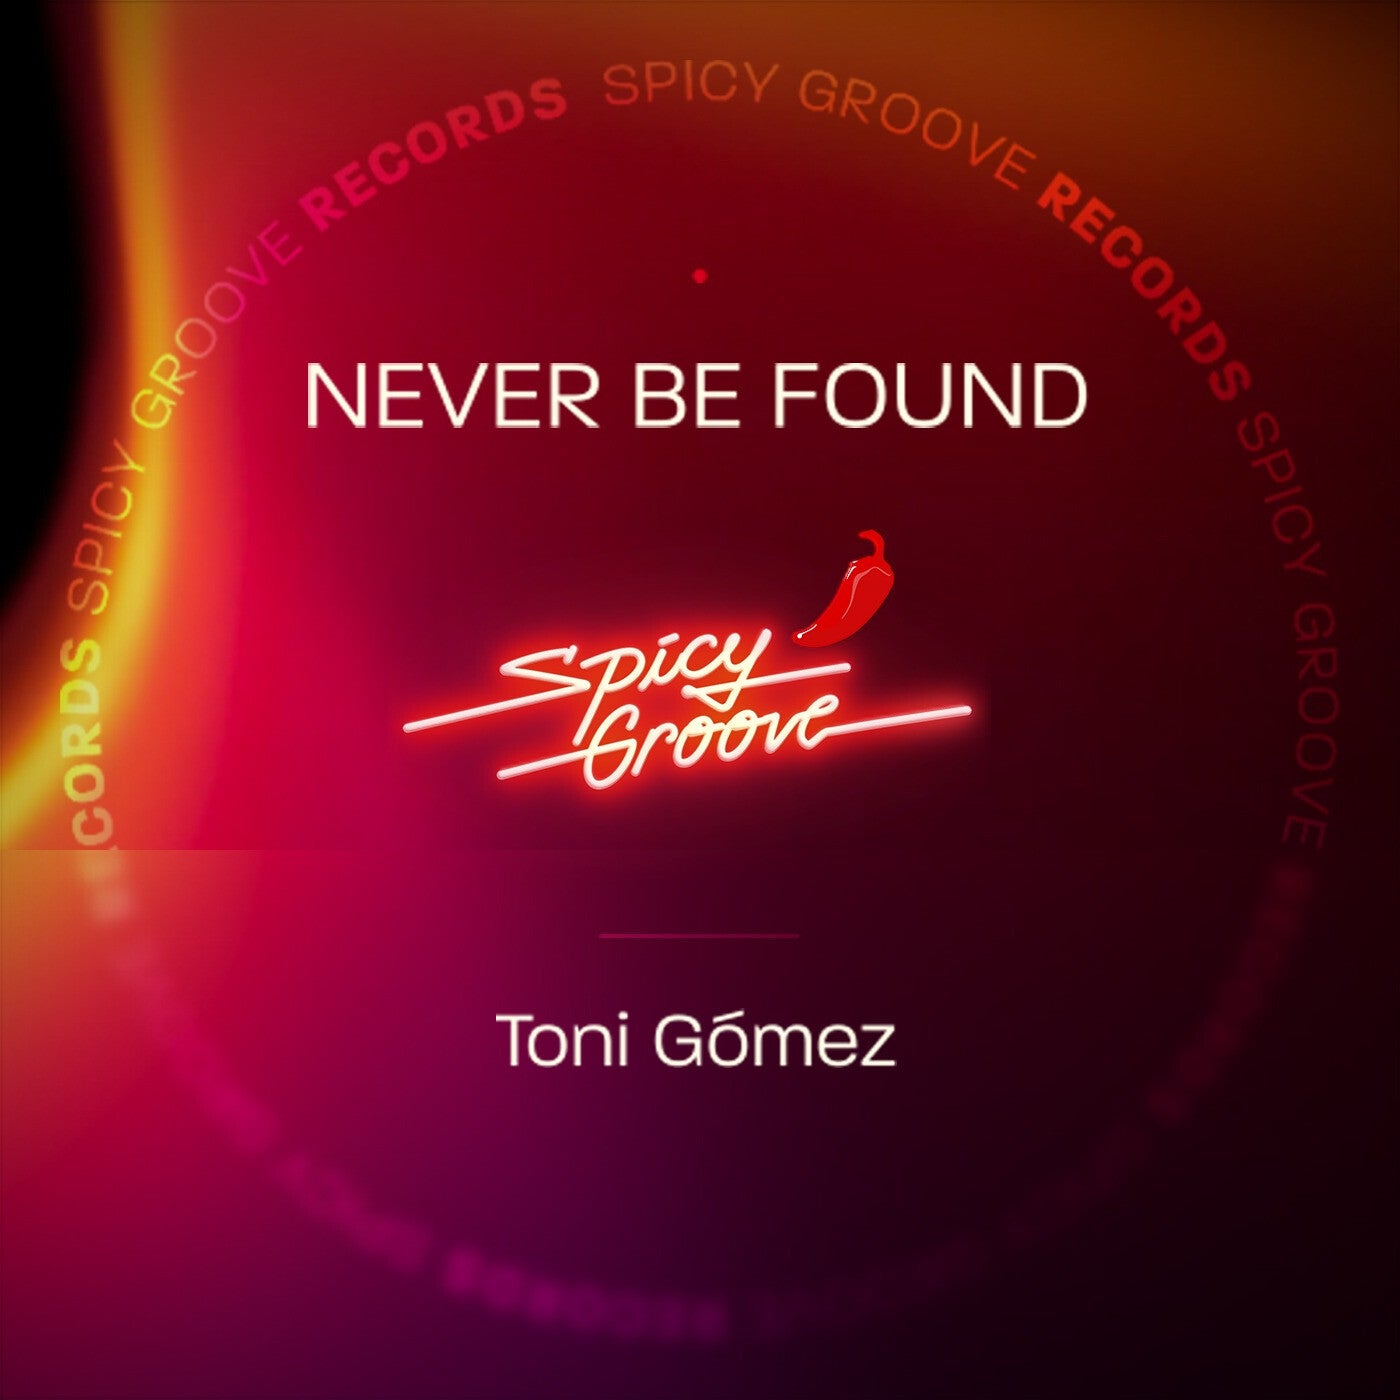 Never be Found